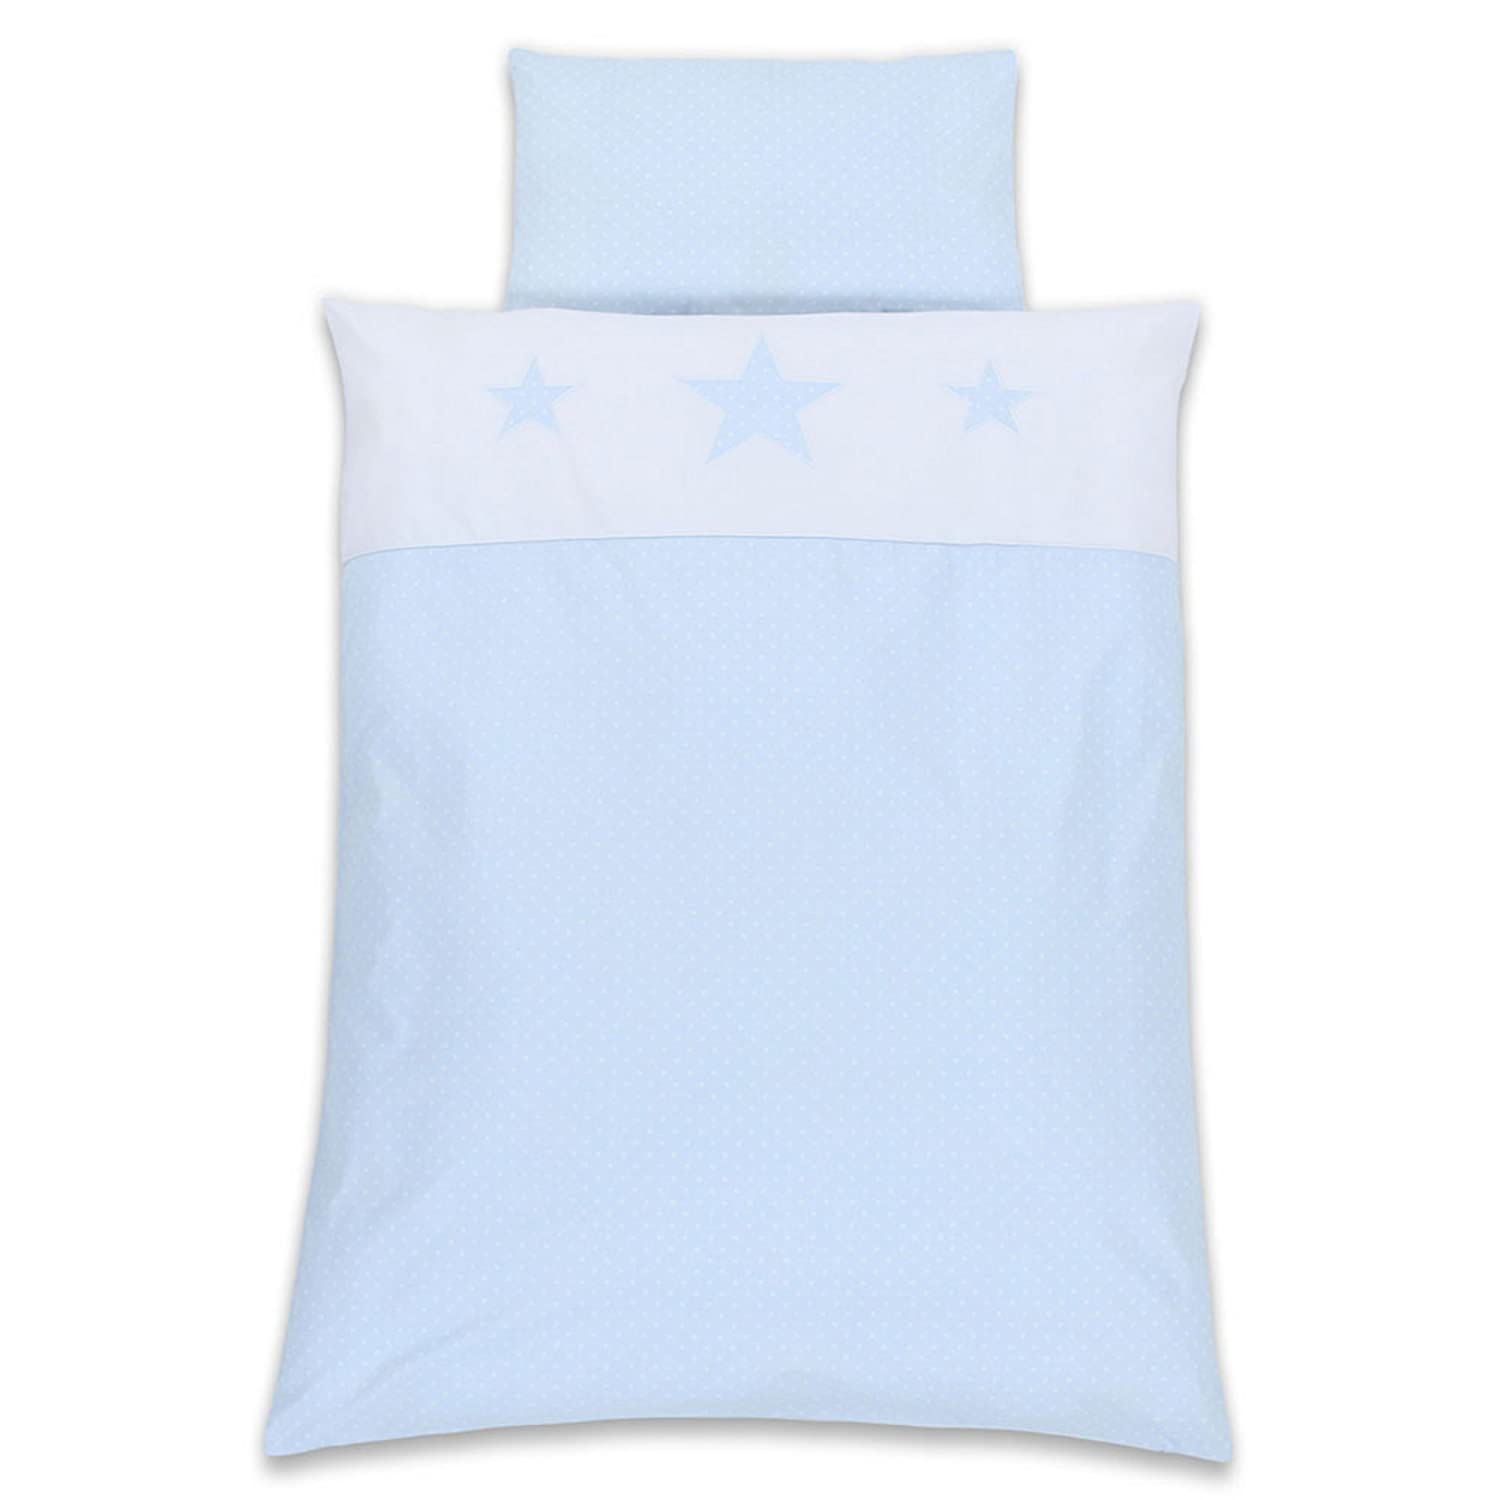 Babybay Cot Bed Linen Pique Iloveyou Light Blue With White Polka Dots